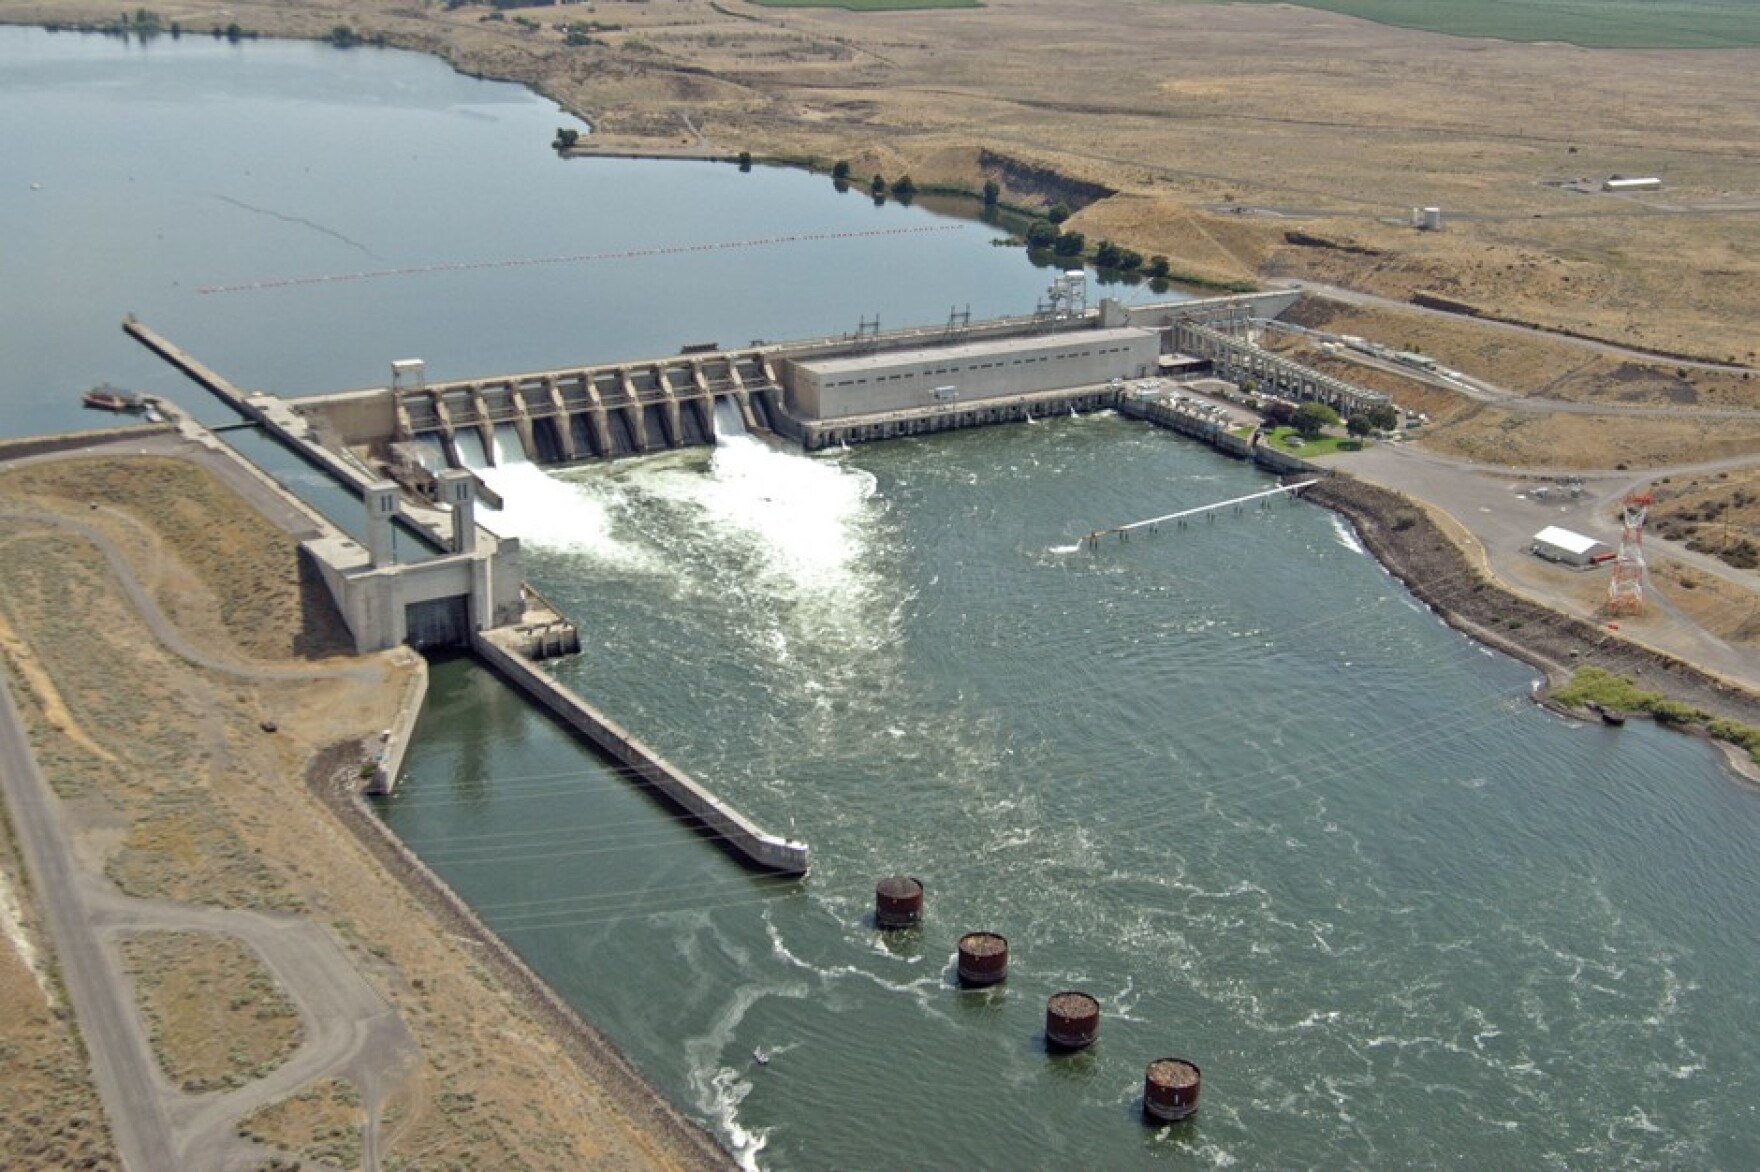 According to a new survey, a majority of people in the Northwest want the four Lower Snake River dams removed.